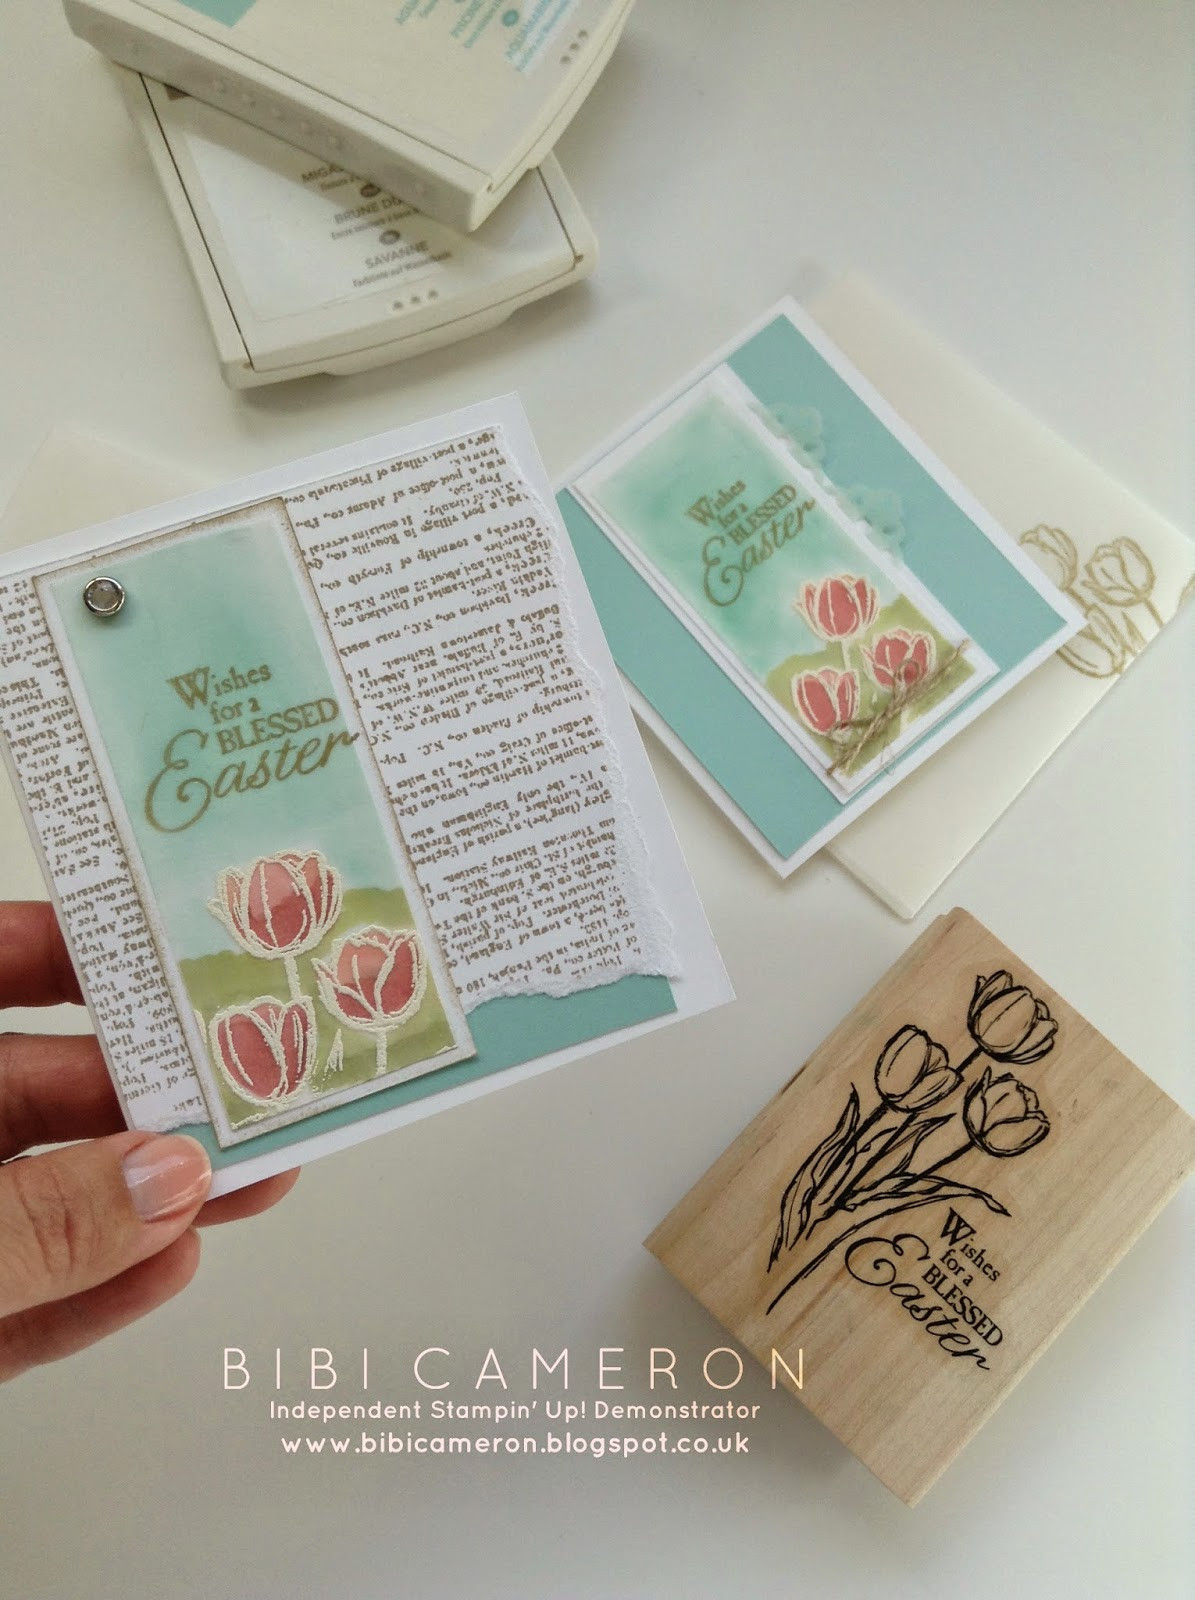 Stampin Up Easter Cards Ideas
 BLESSED EASTER STAMP ♥ STAMPIN UP CARD IDEAS Bibi Cameron